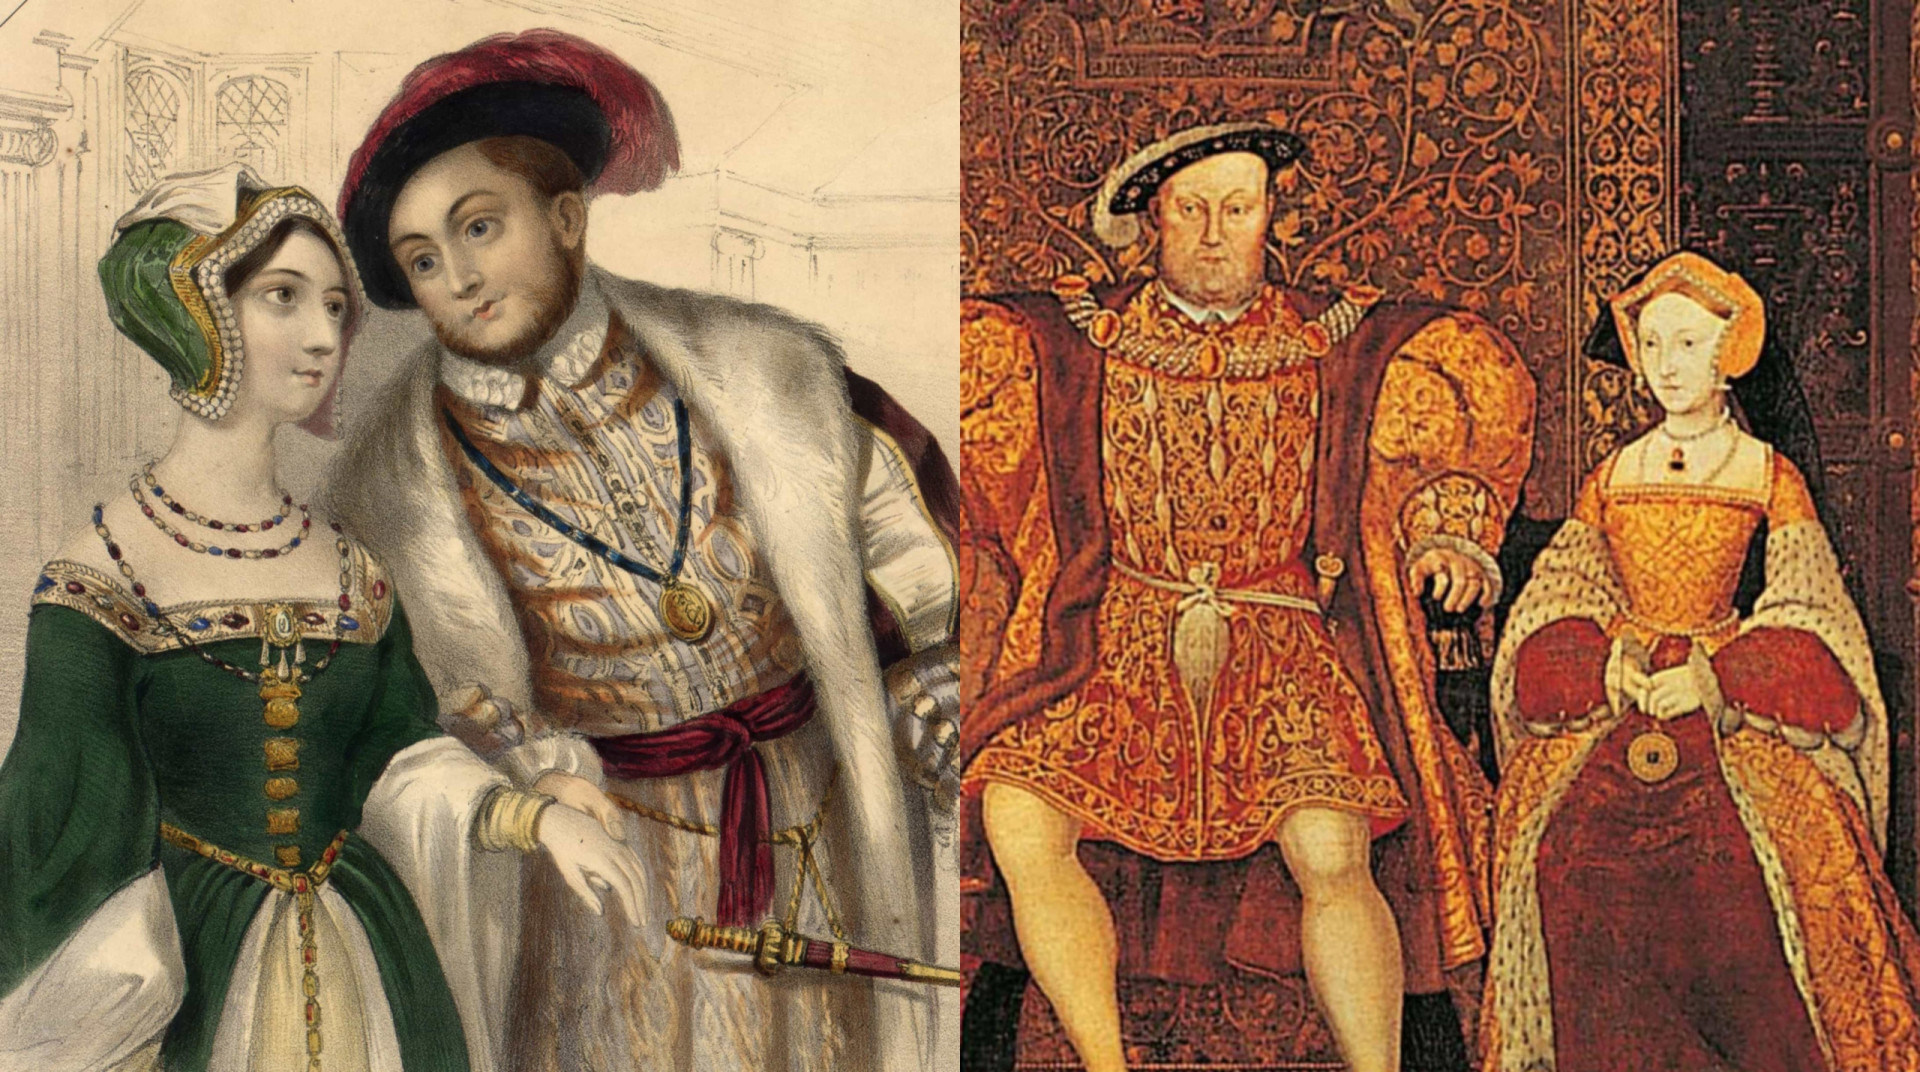 What fate befell the six wives of Henry VIII?